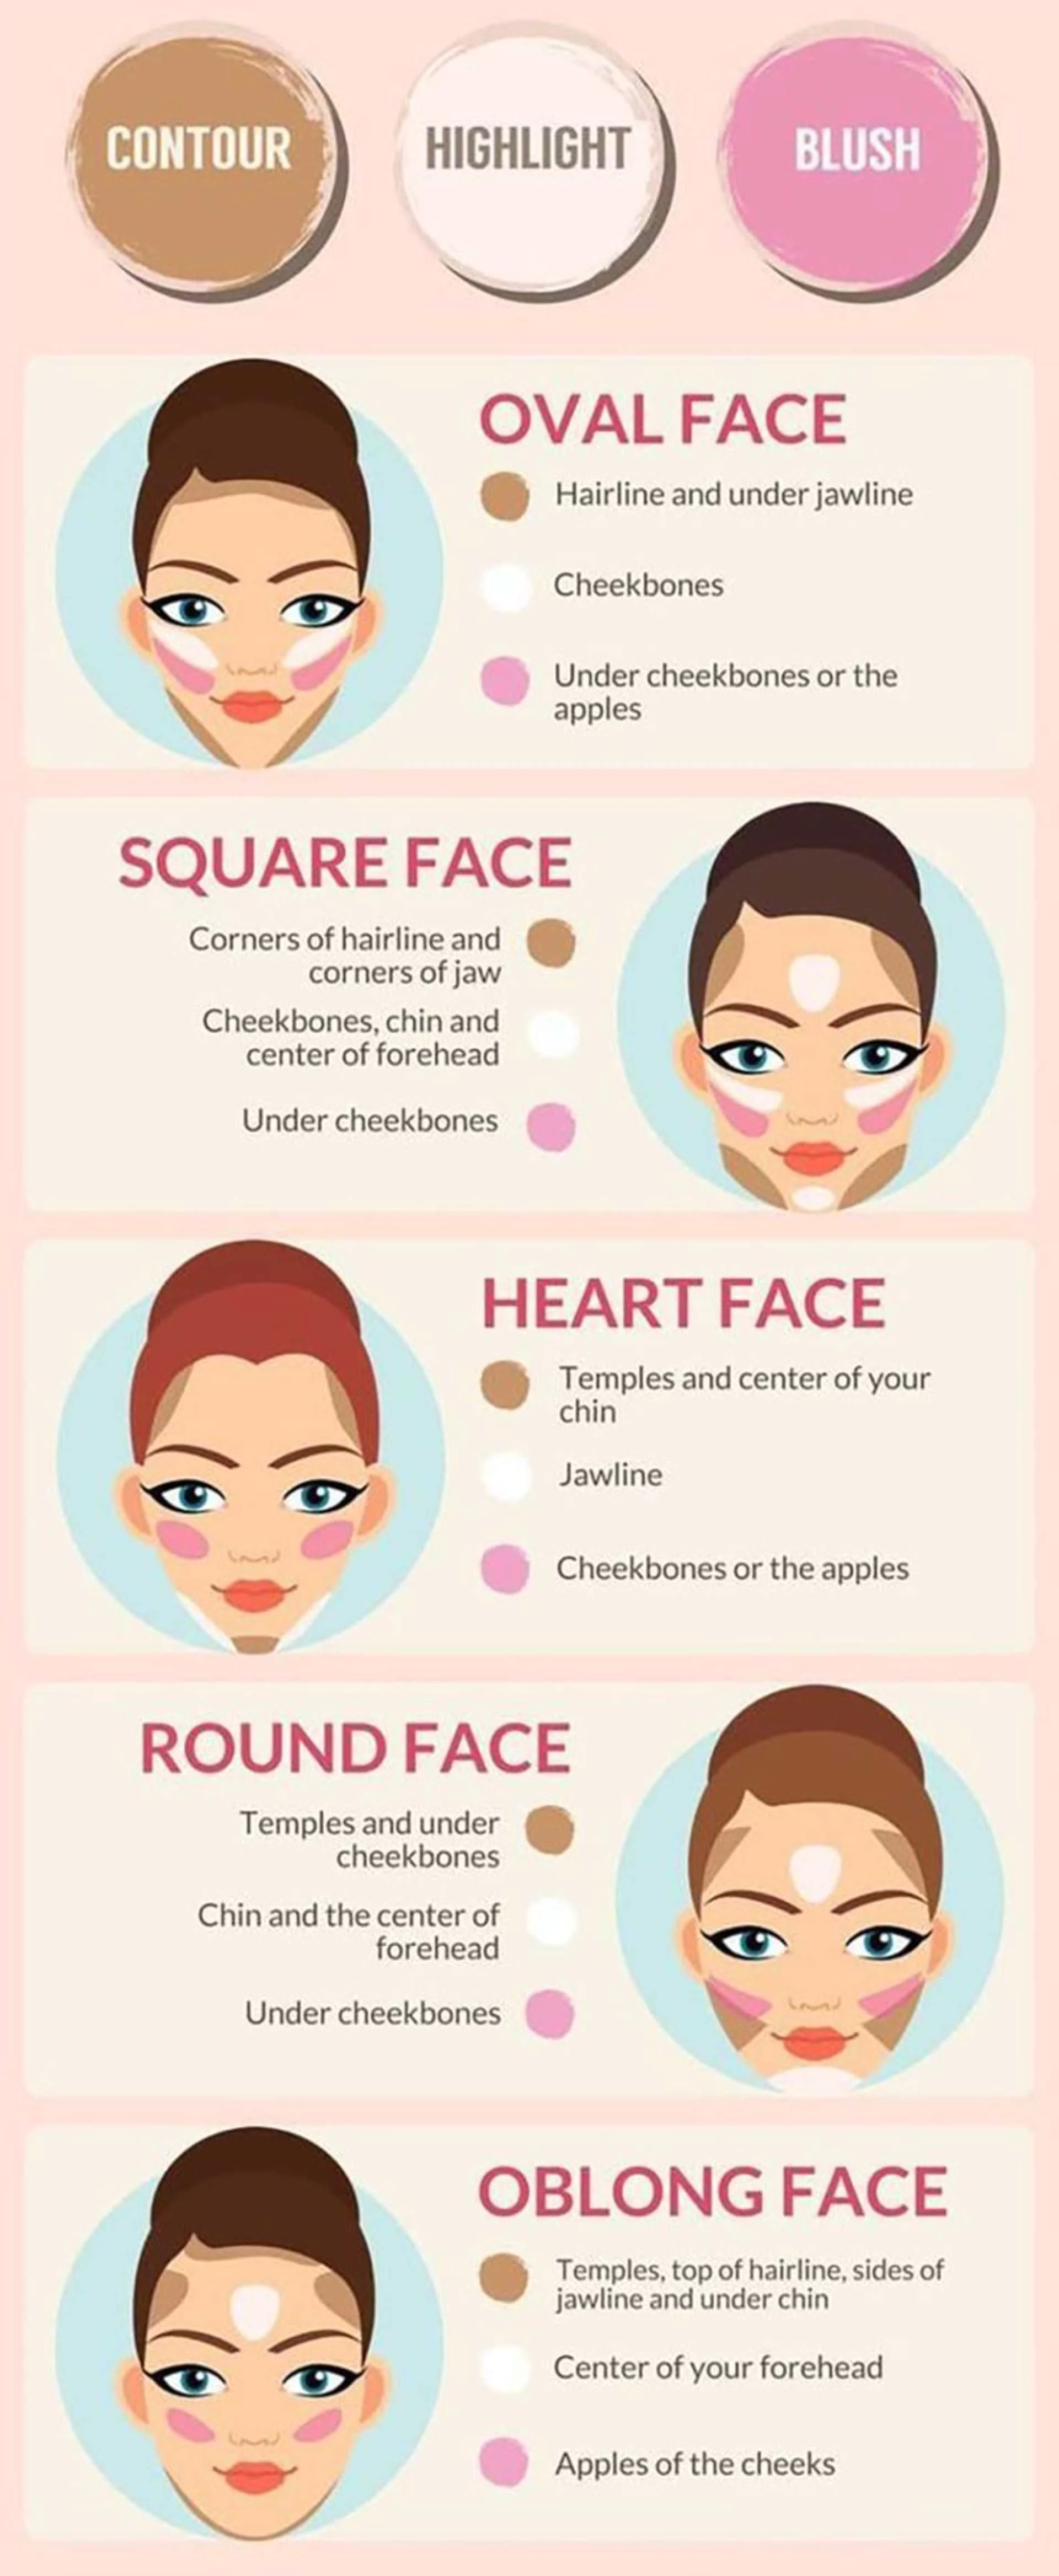 The Ultimate Guide For Choosing Makeup Based On Your Face Shape